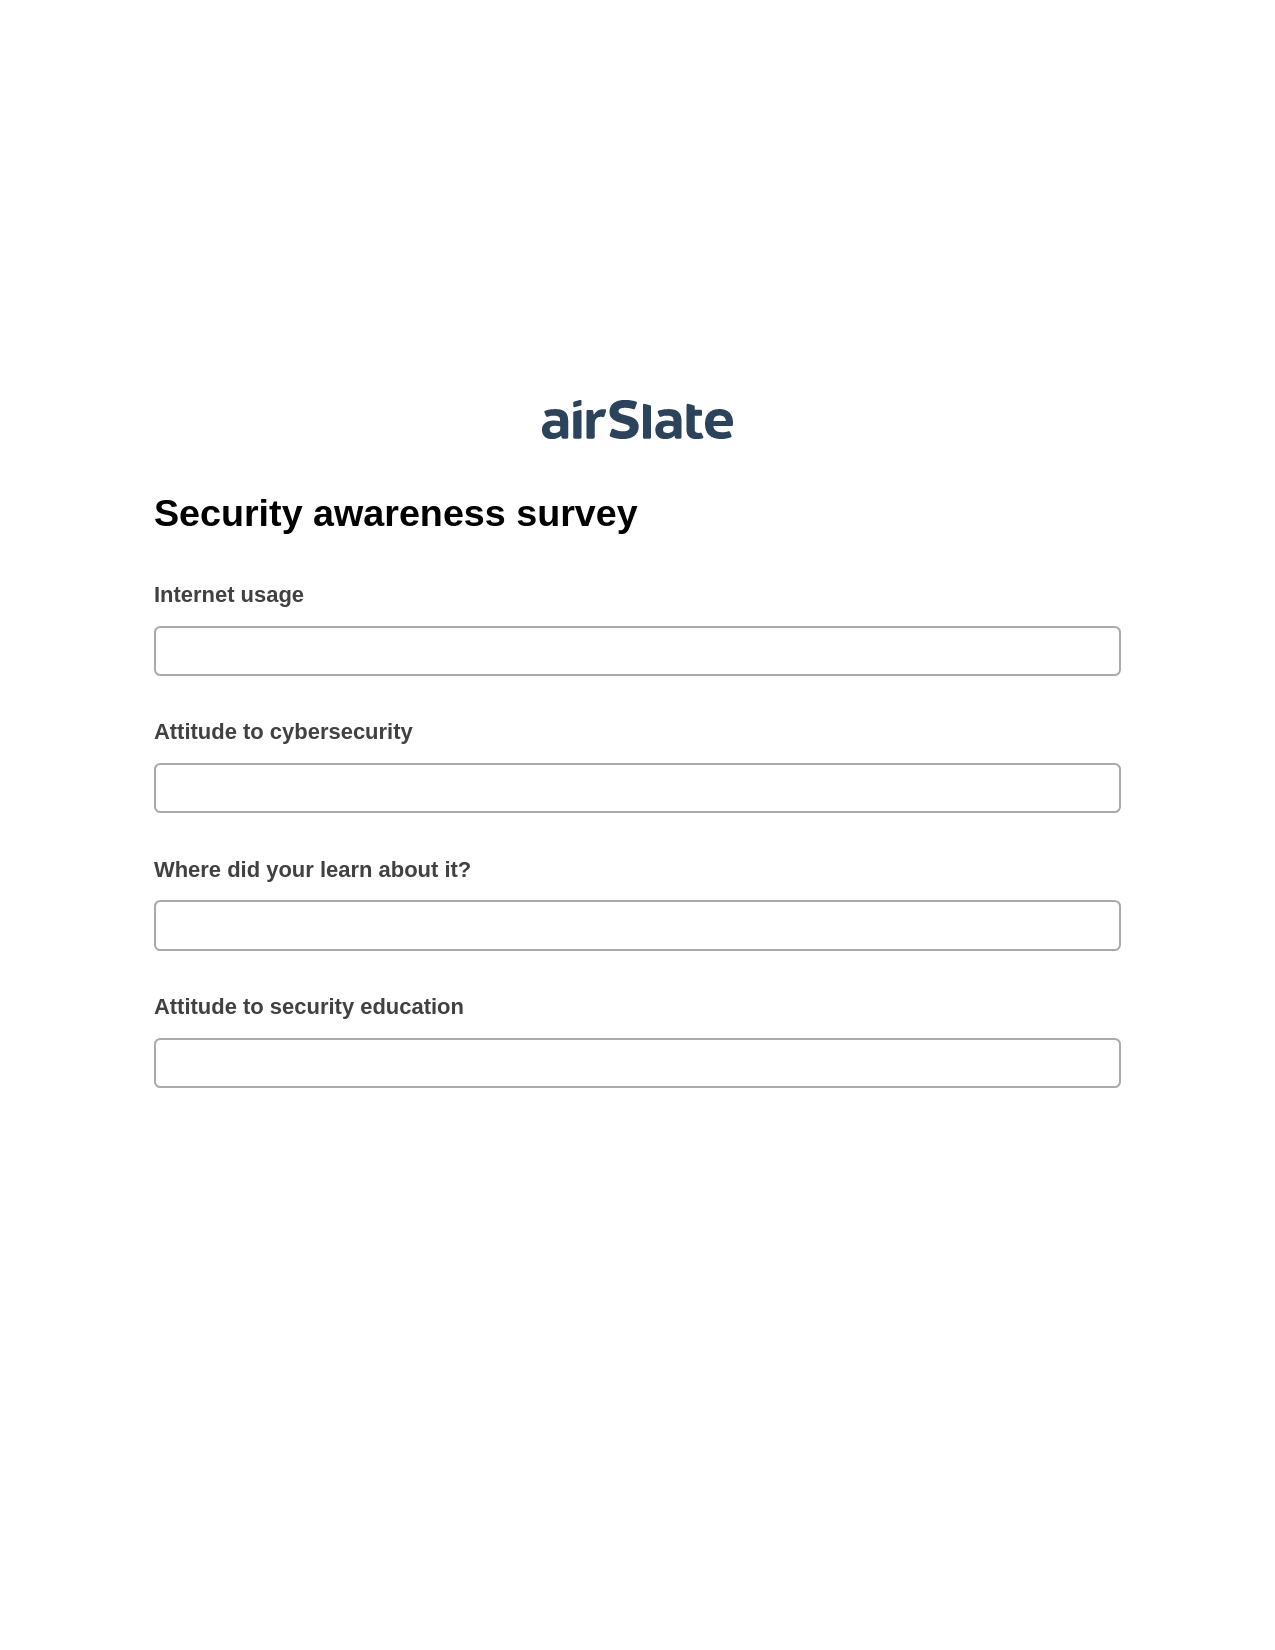 Security awareness survey Pre-fill from MS Dynamics 365 Records DEPRECATED, Create Slate Reminder Bot, Export to Smartsheet